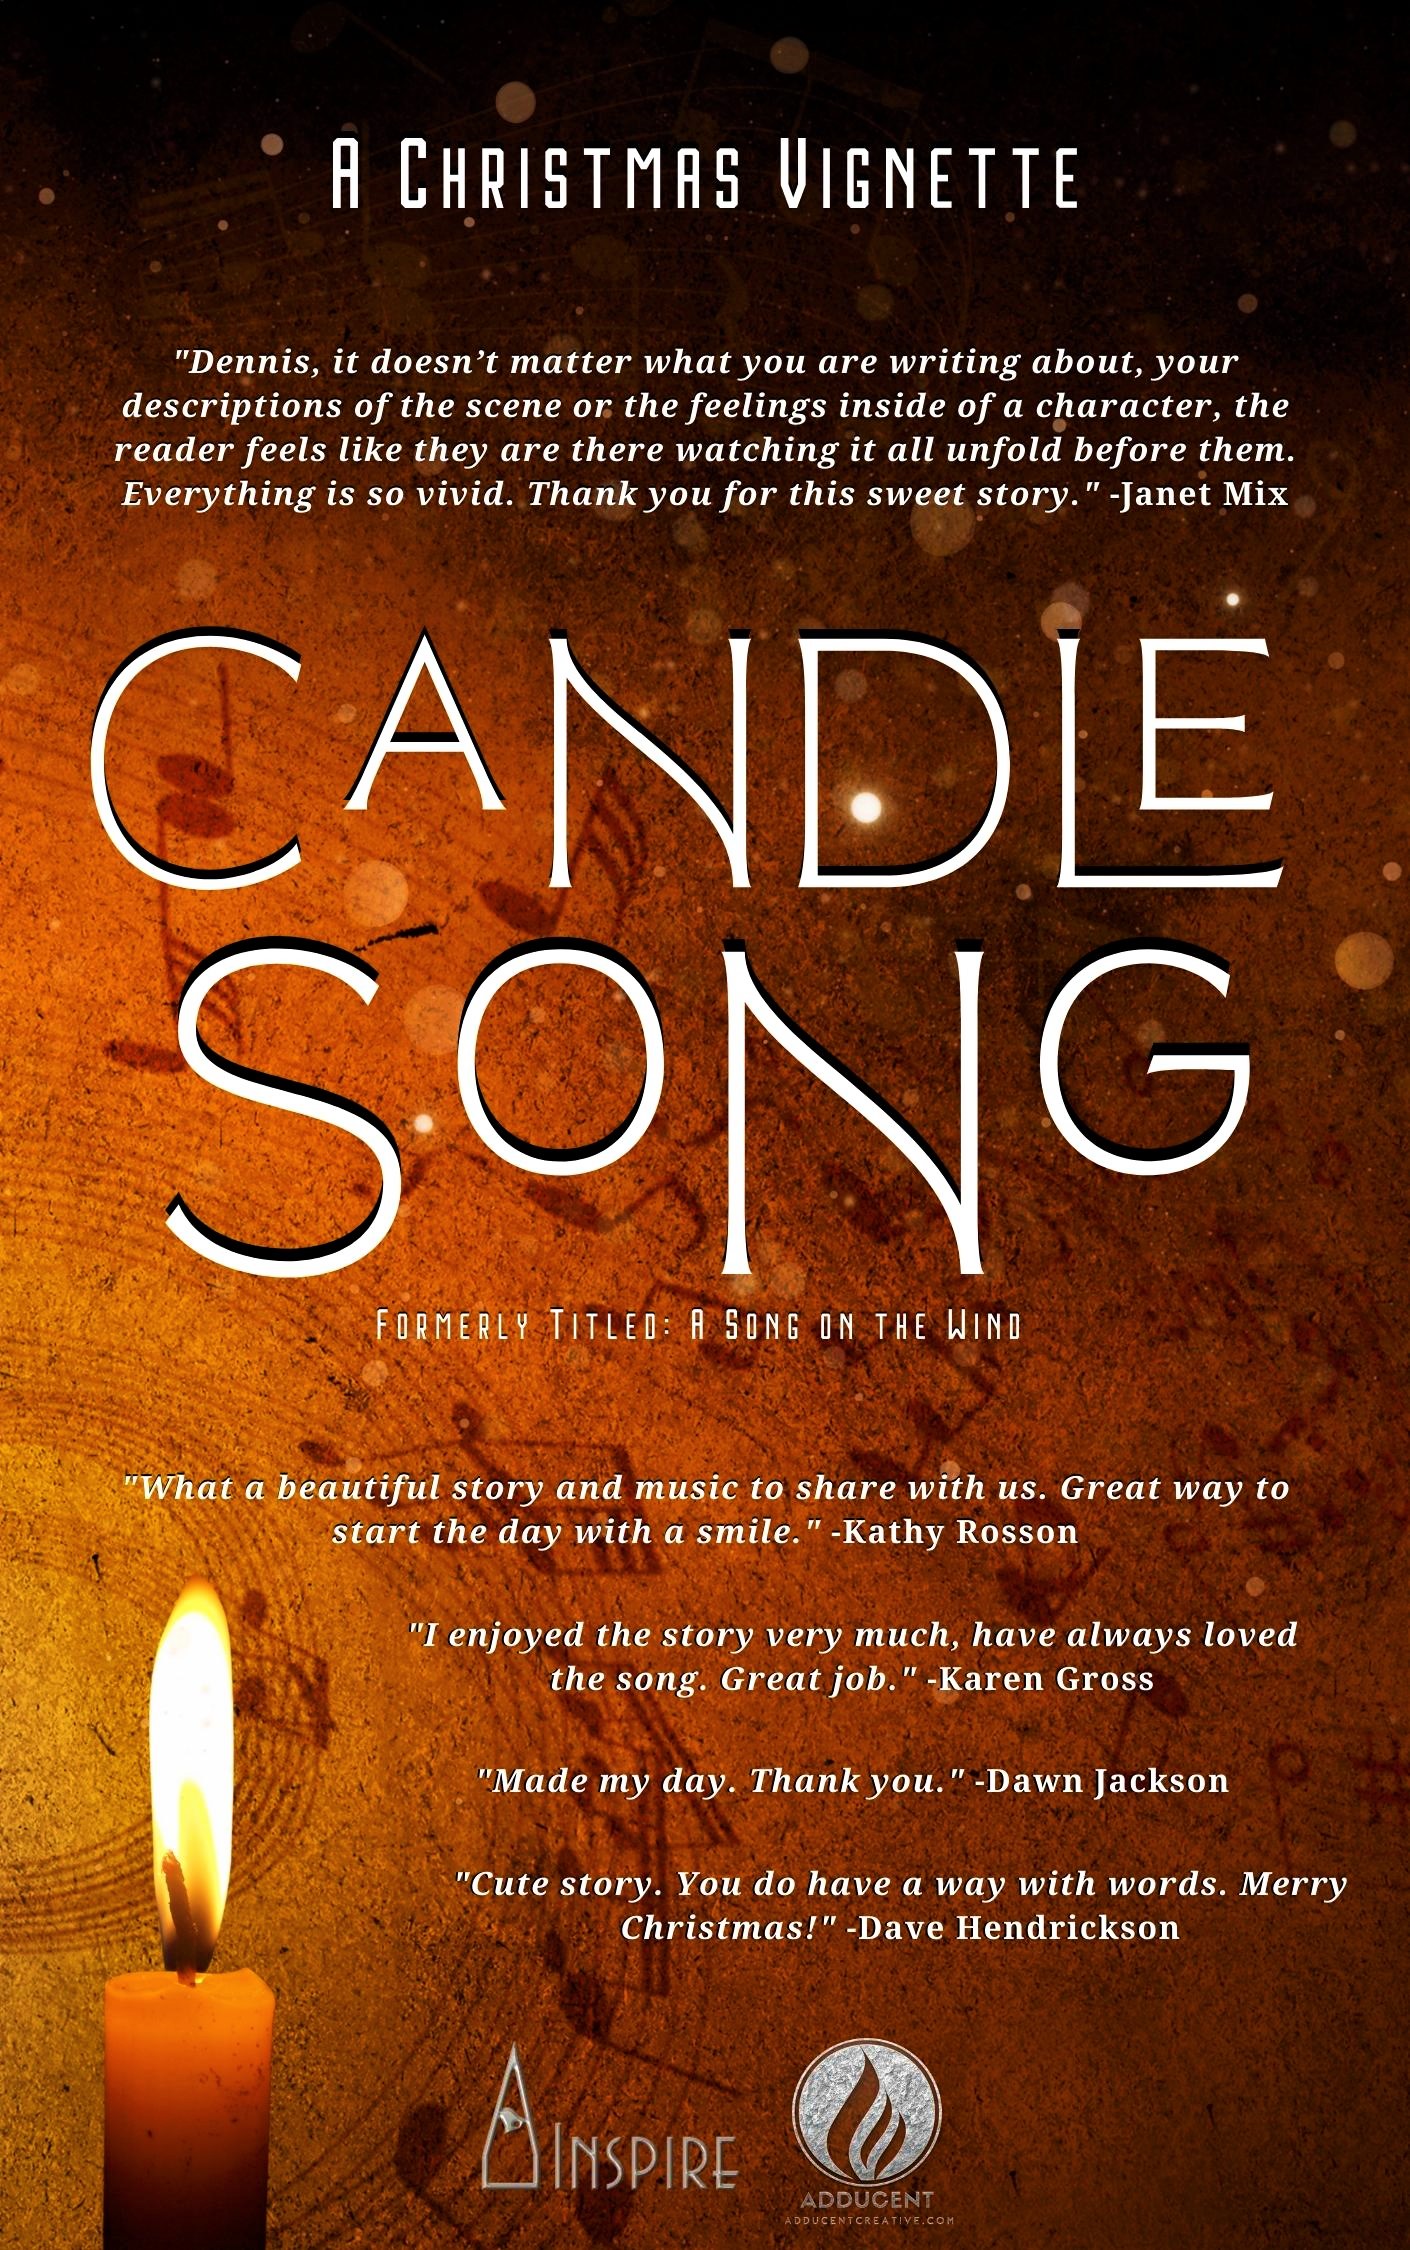 CANDLE SONG (A Christmas Vignette) from Dennis Lowery. 